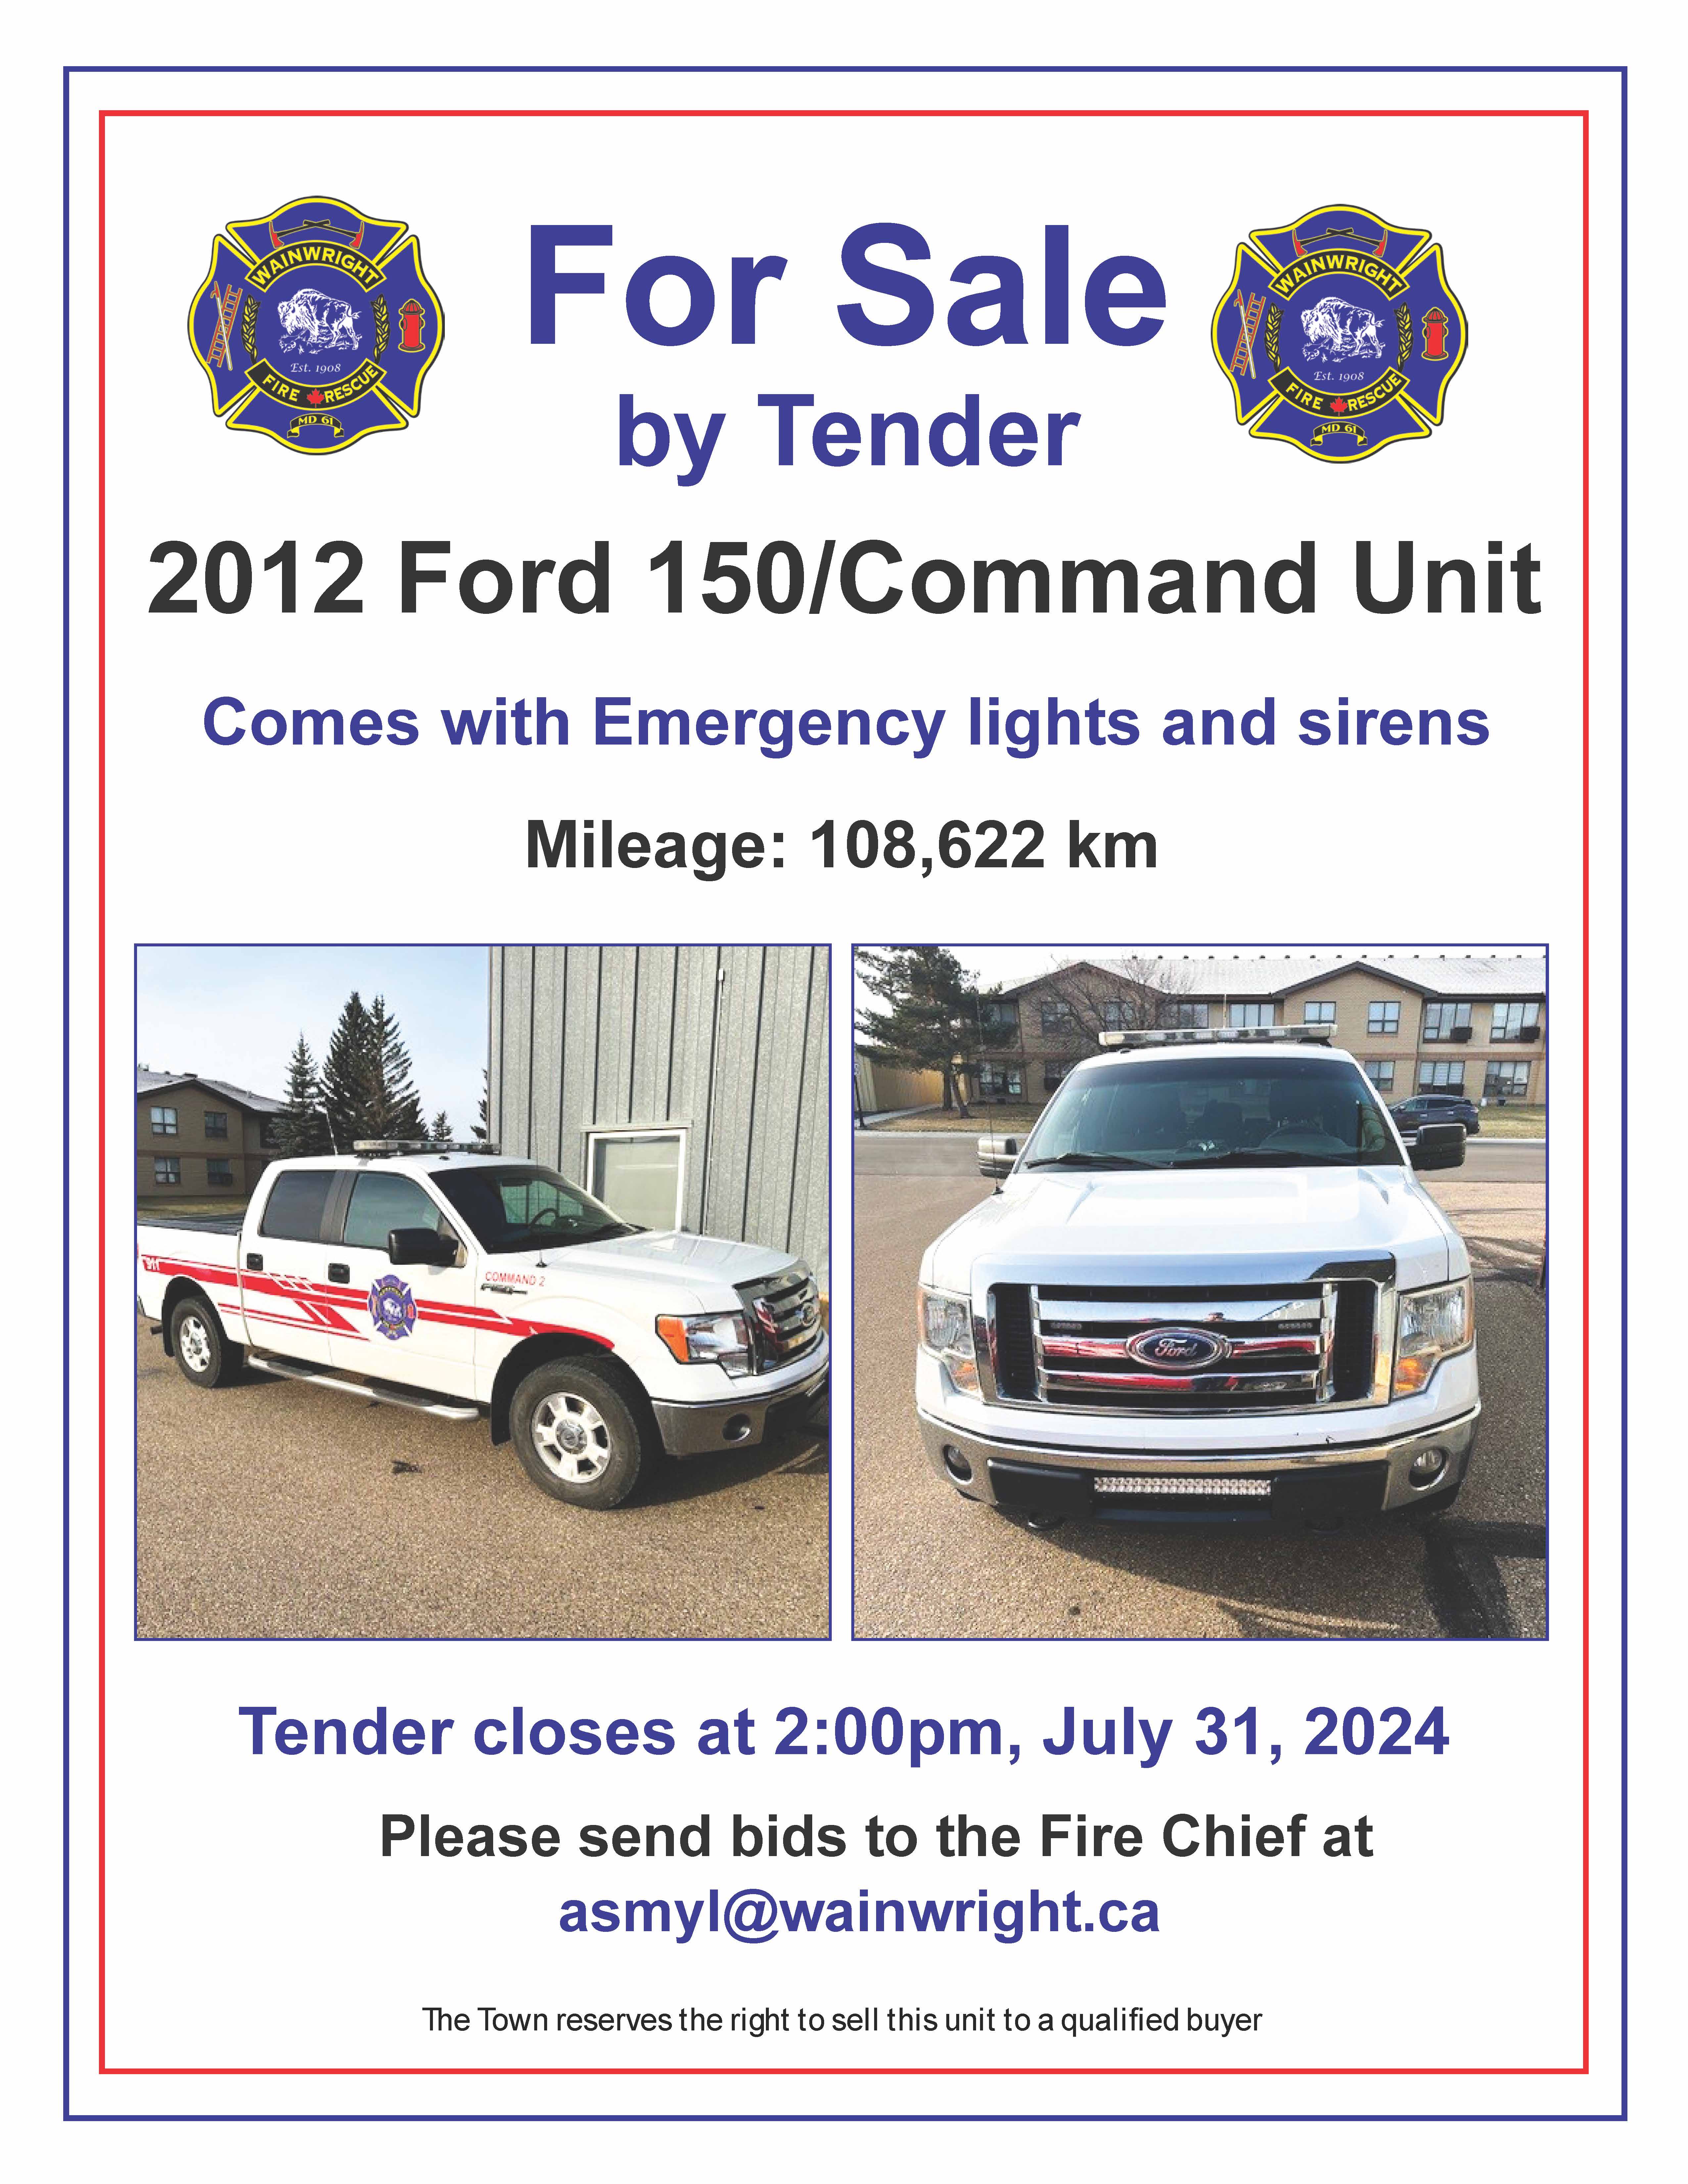 2012 Ford 150 Command Unit For Sale